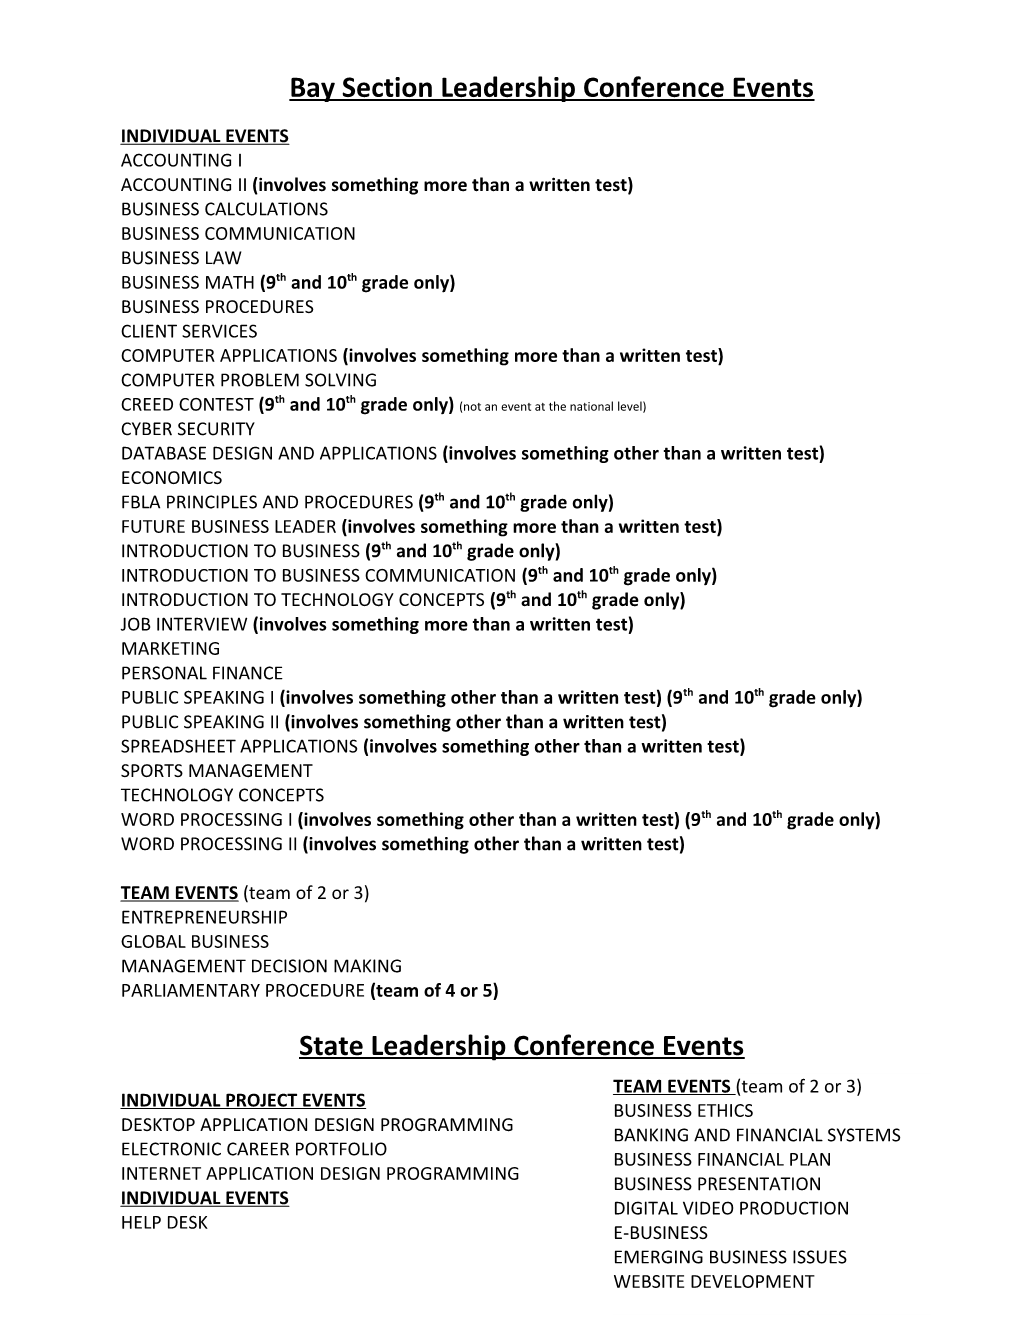 Bay Section Leadership Conference Events